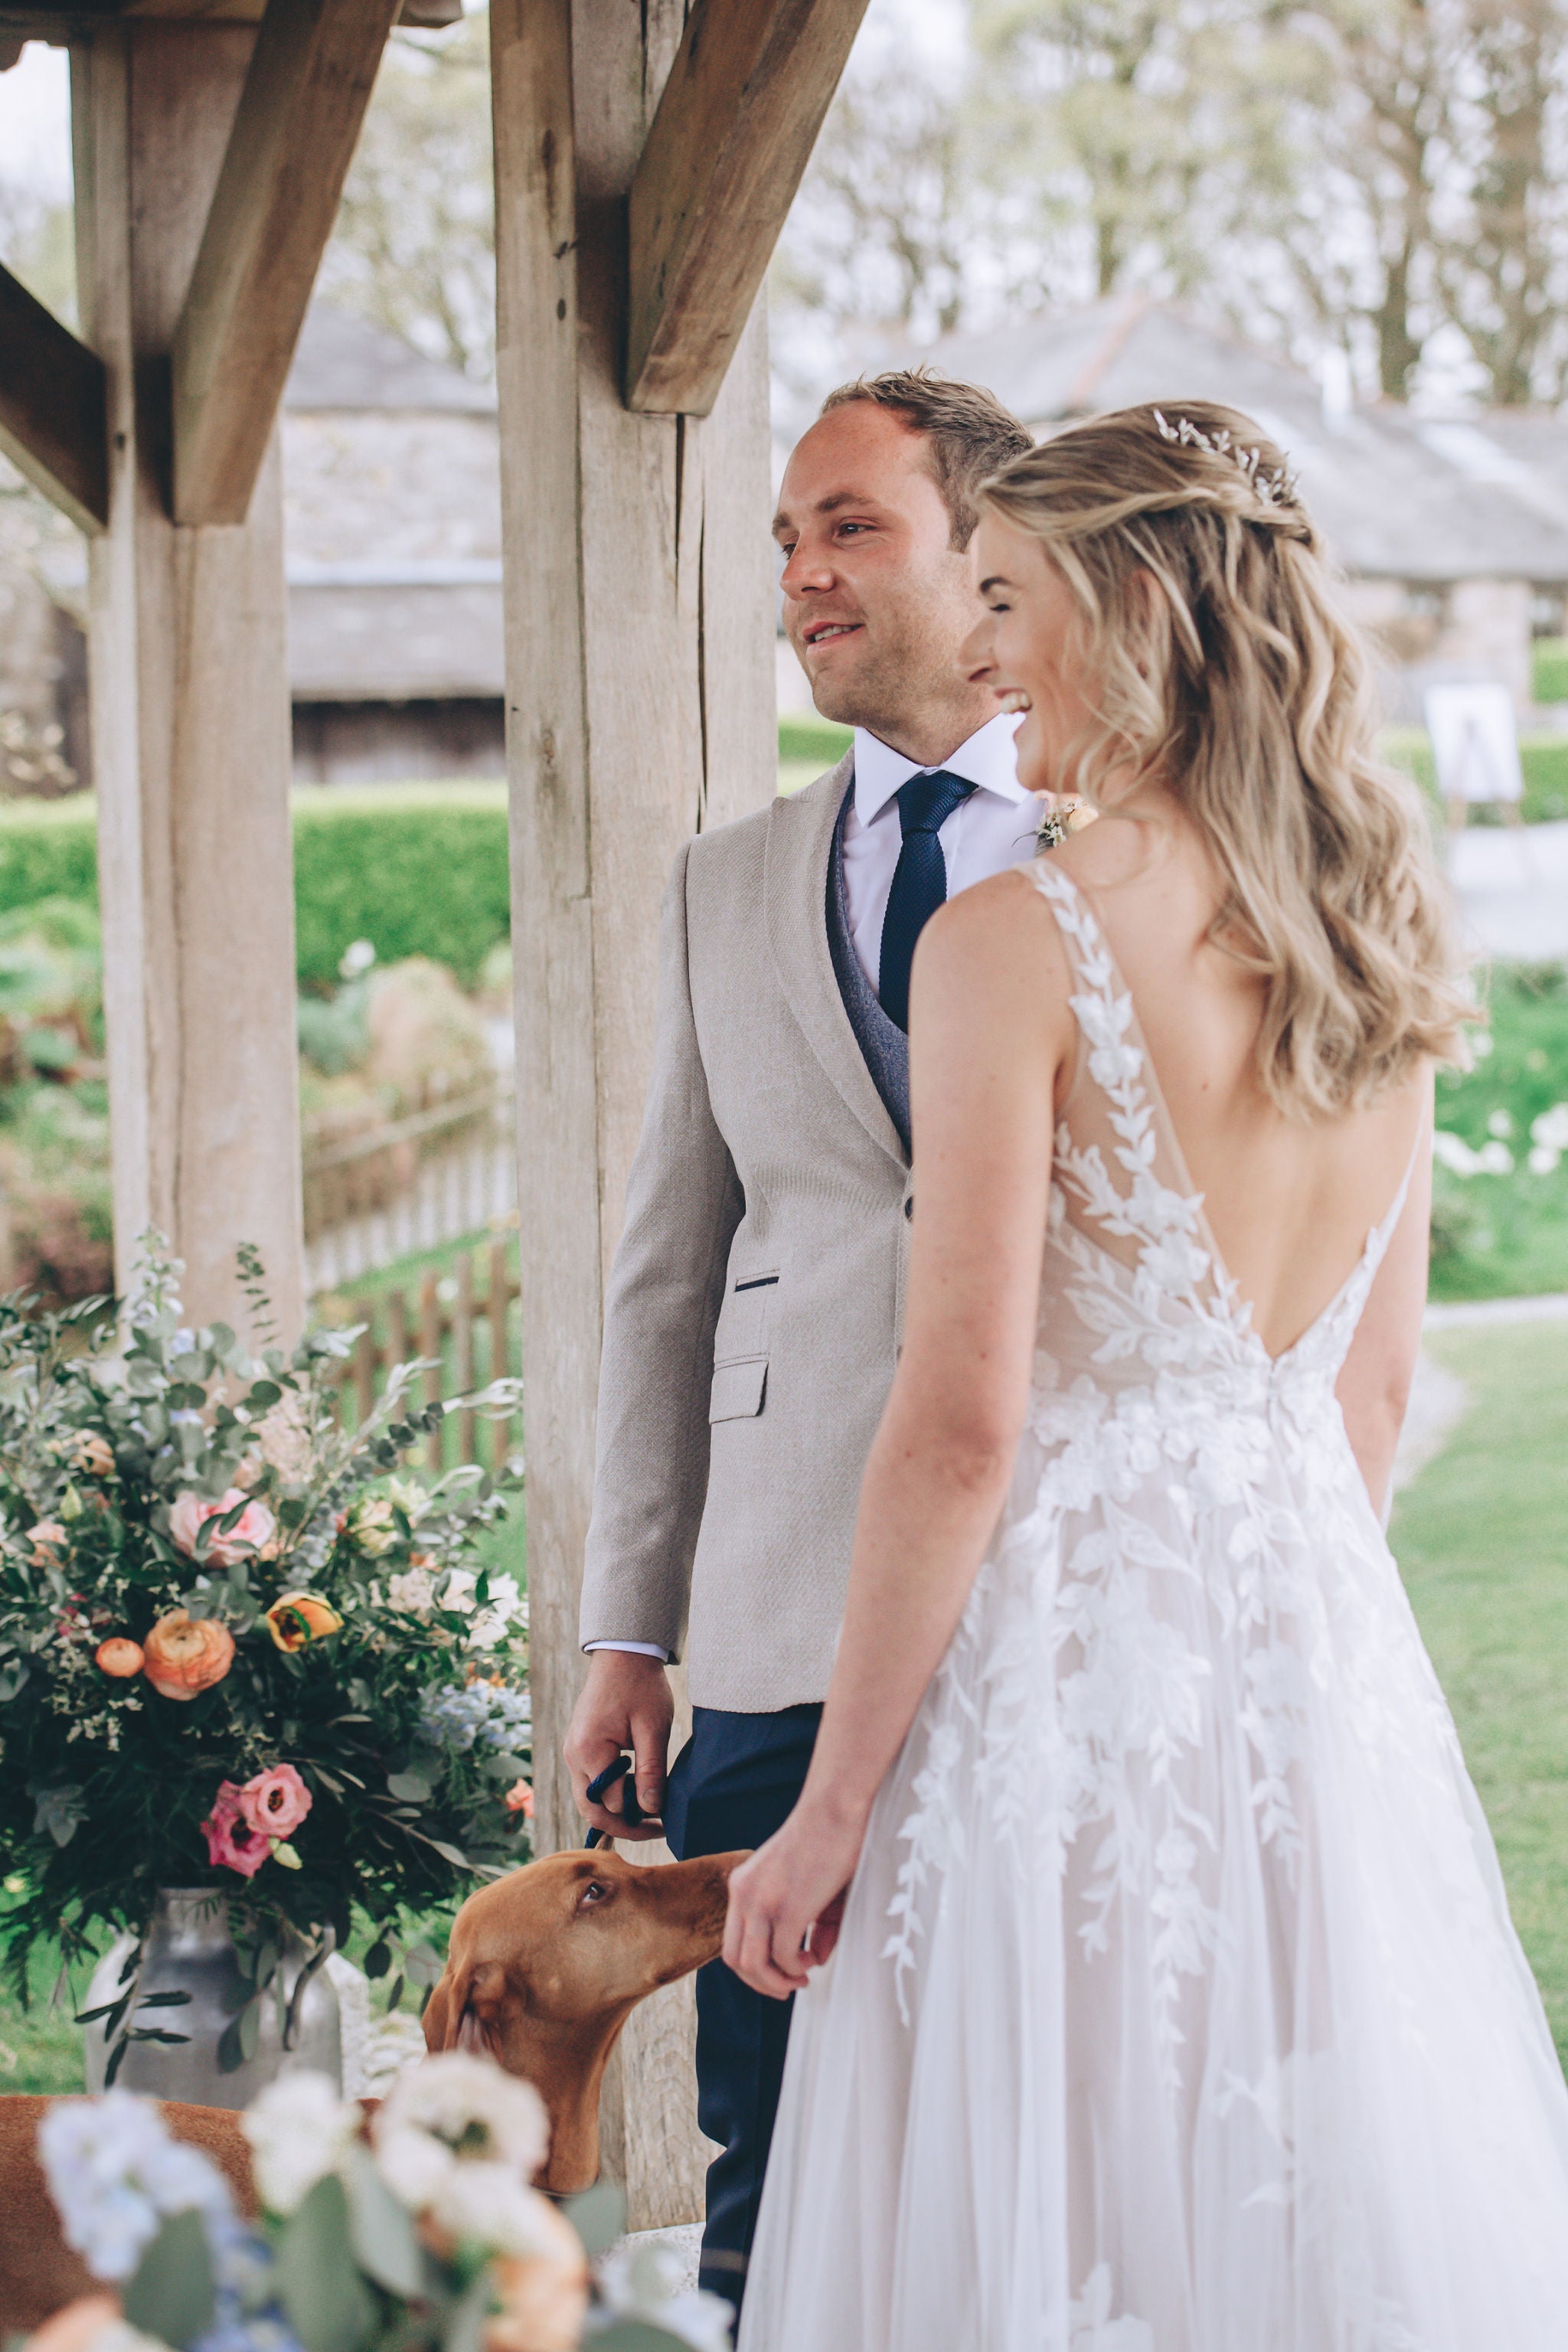 Vows and smiles at Trevenna wedding ceremony